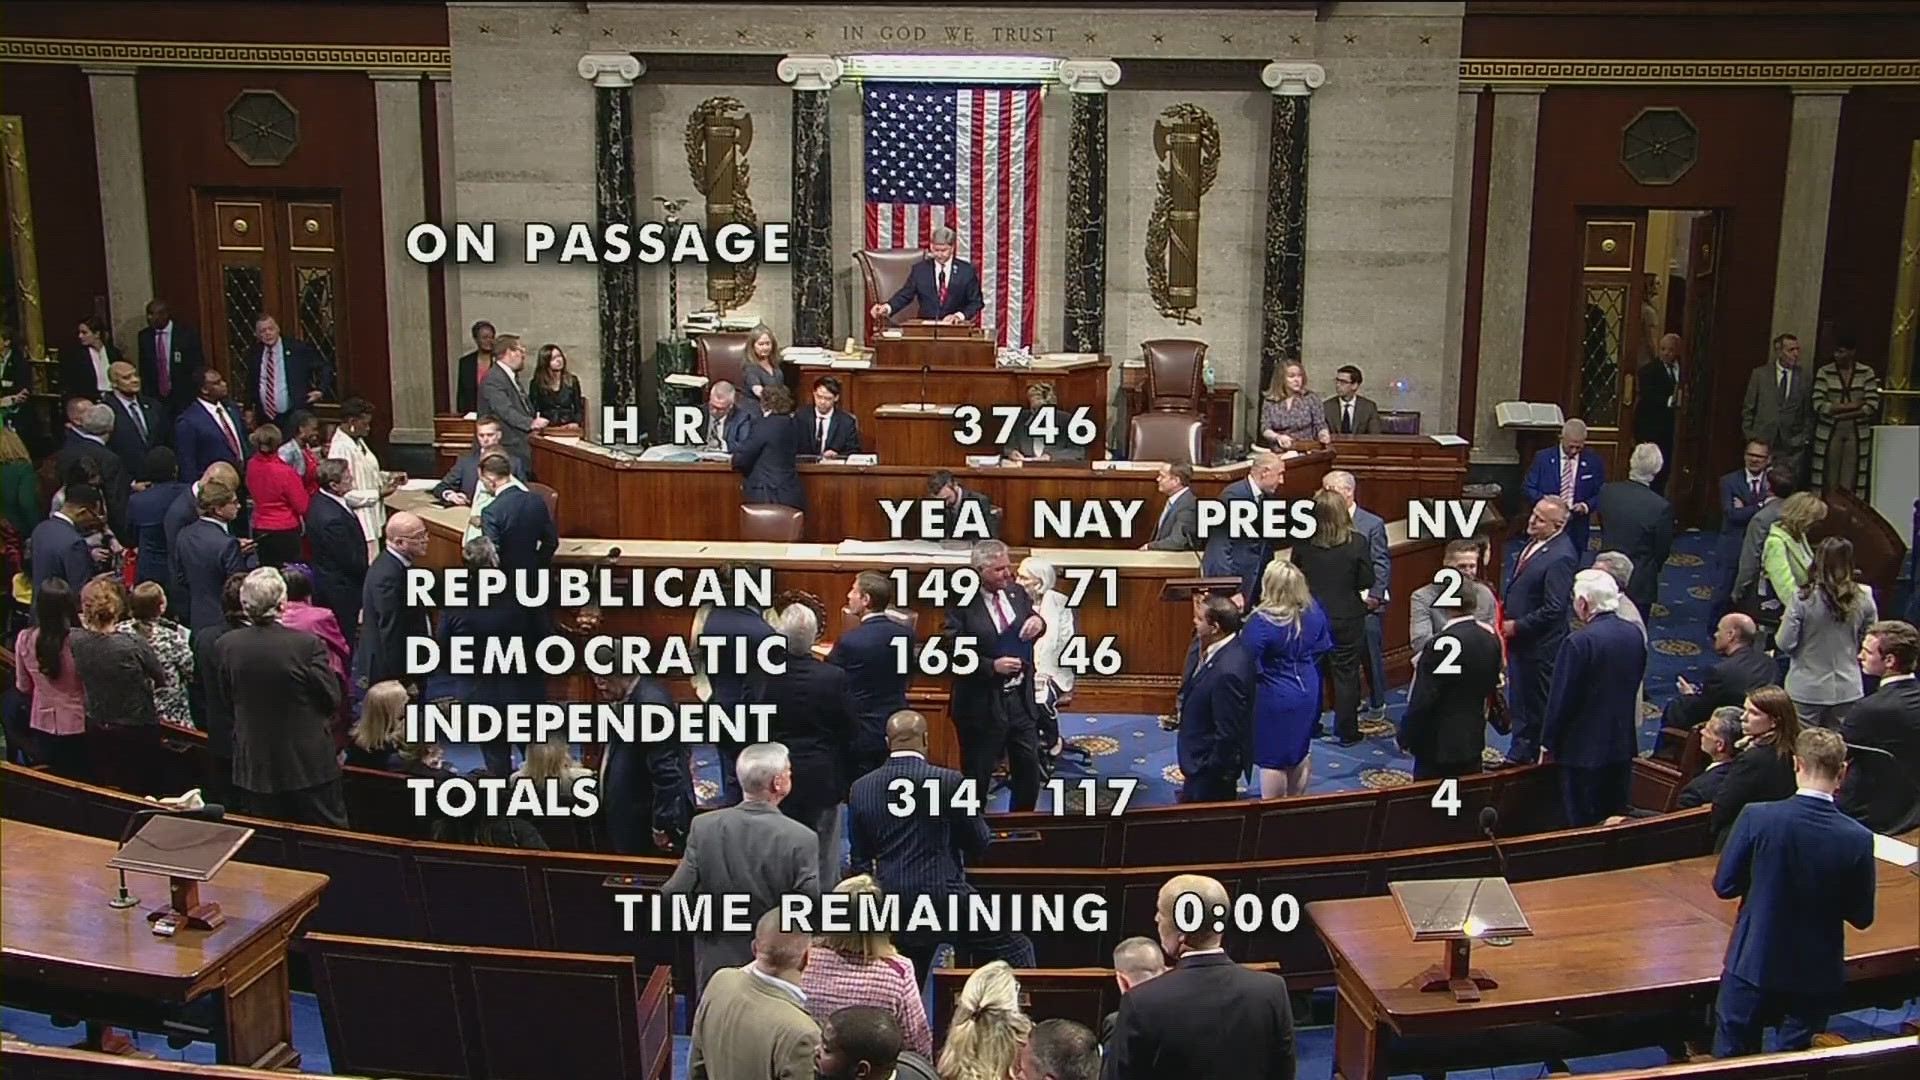 With the House vote of 314-117, the bill now heads to the Senate with passage expected by week's end.